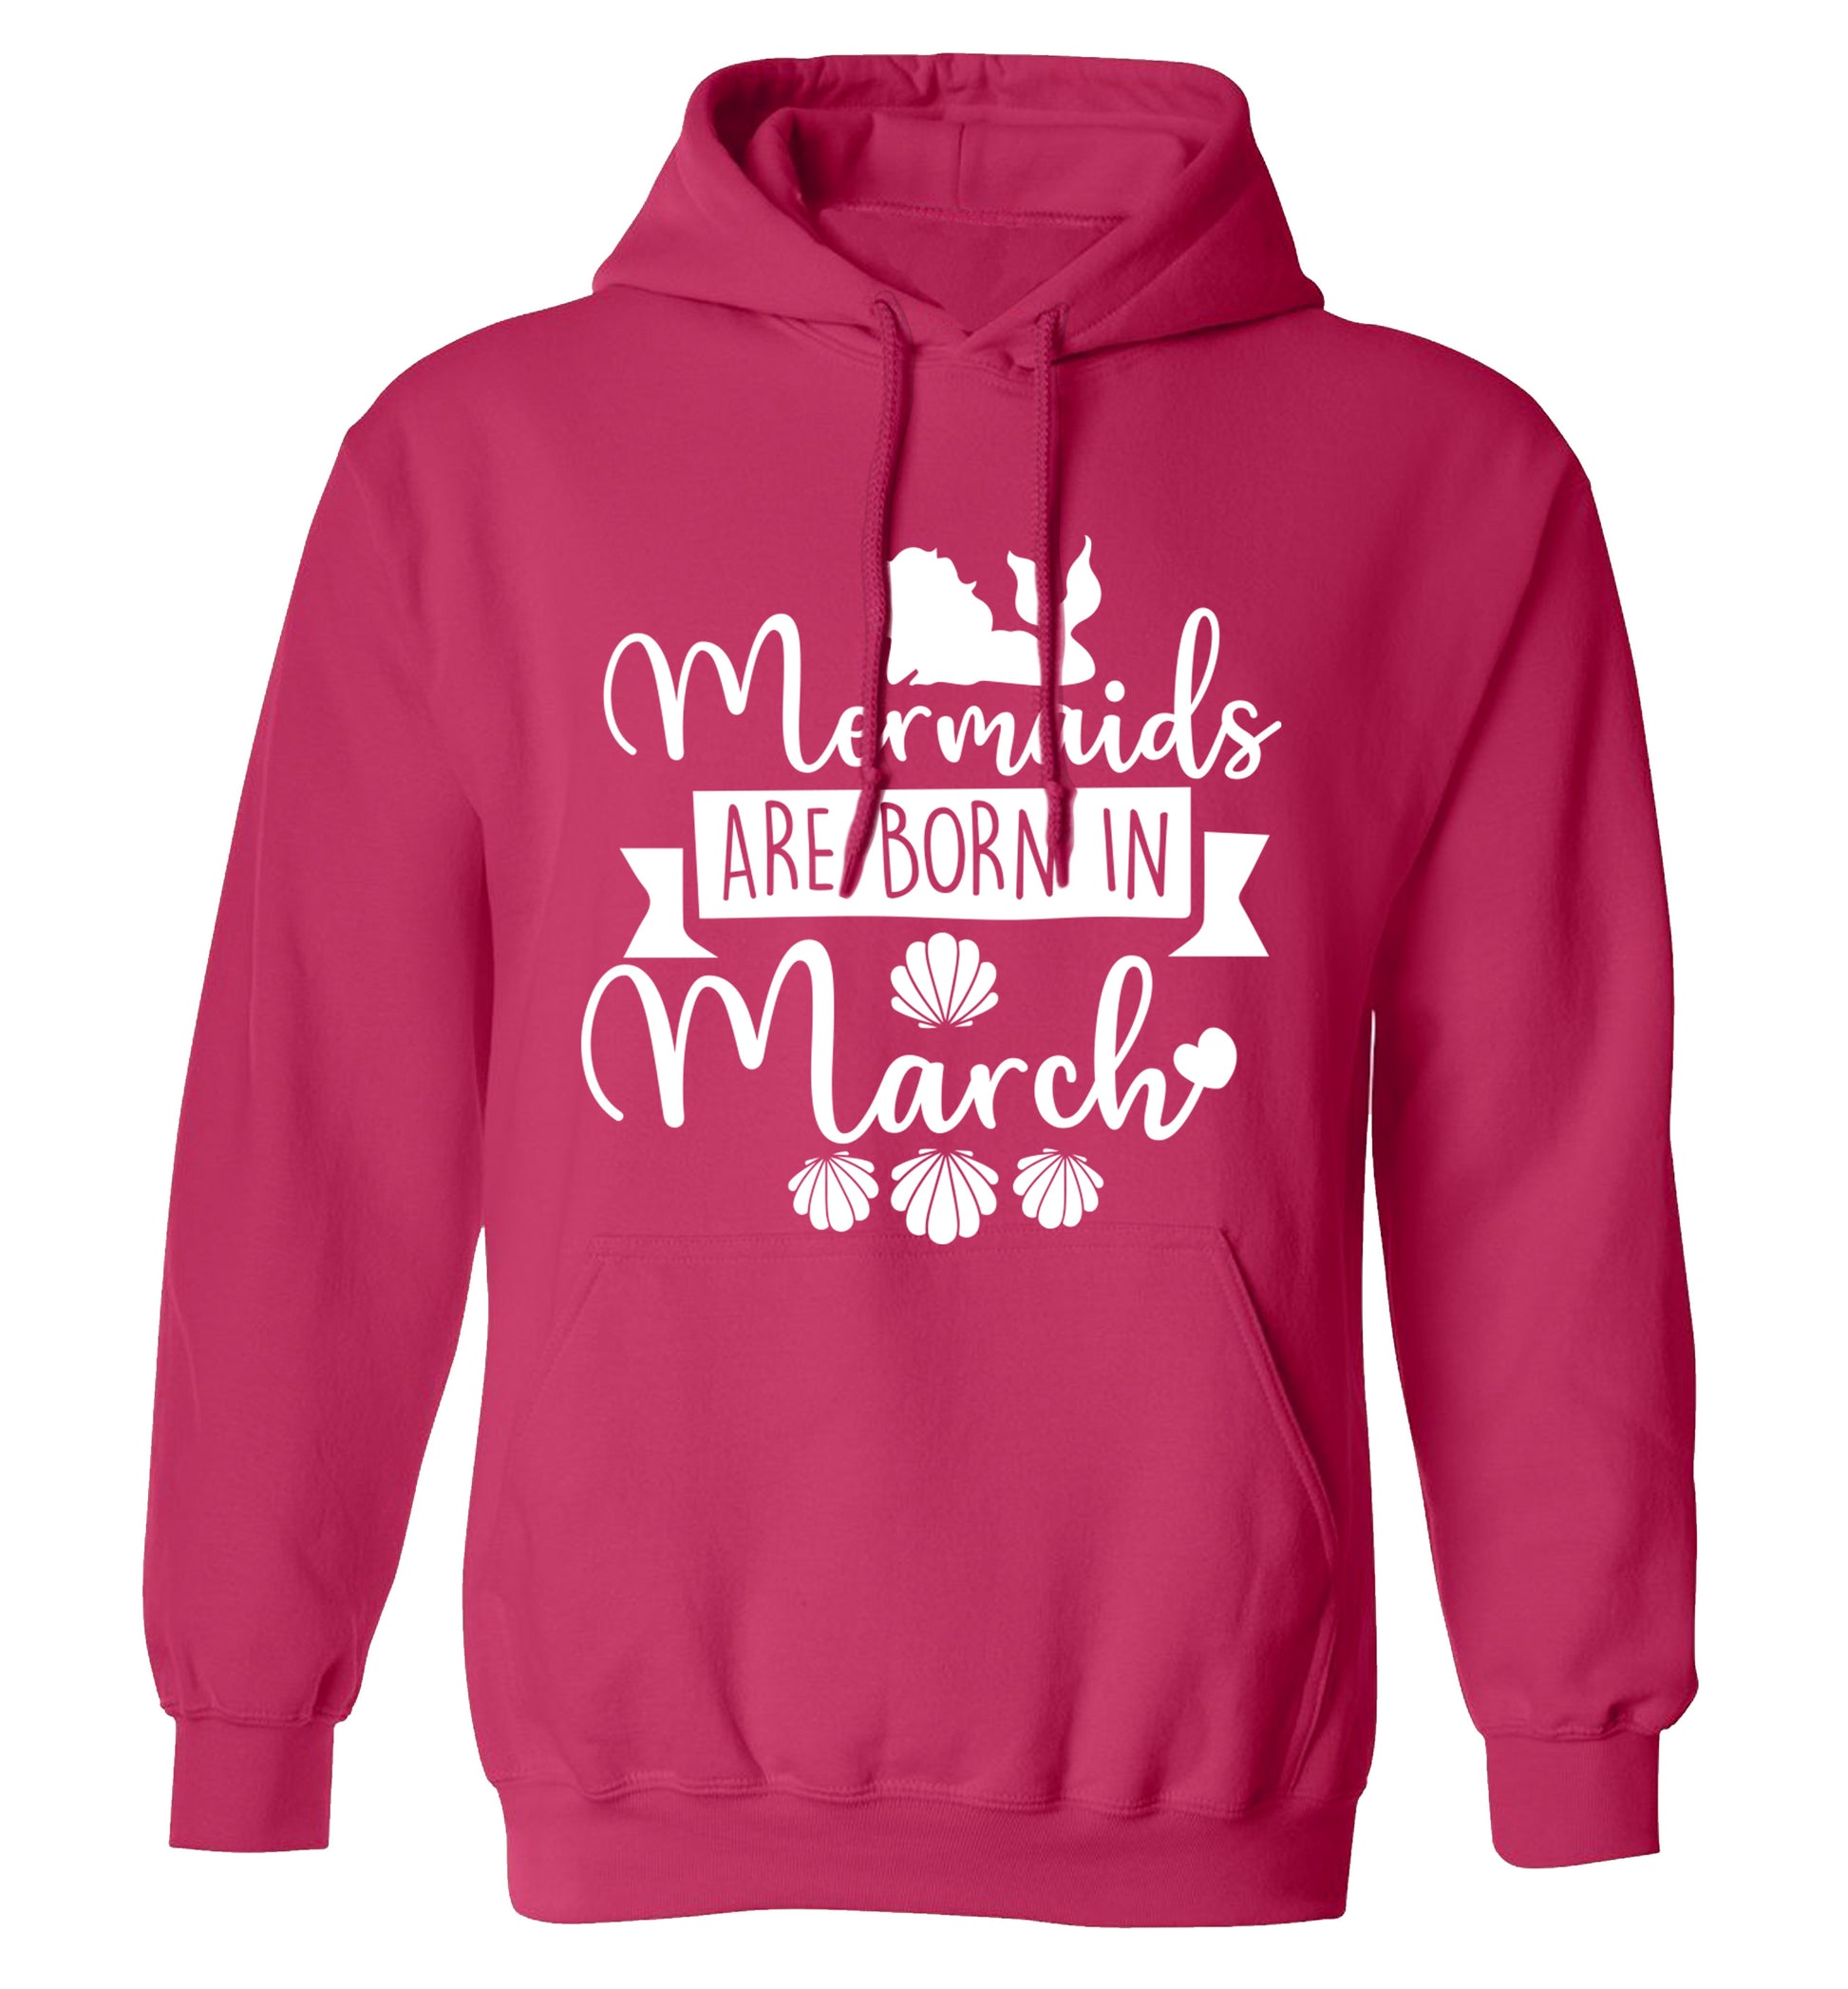 Mermaids are born in March adults unisex pink hoodie 2XL